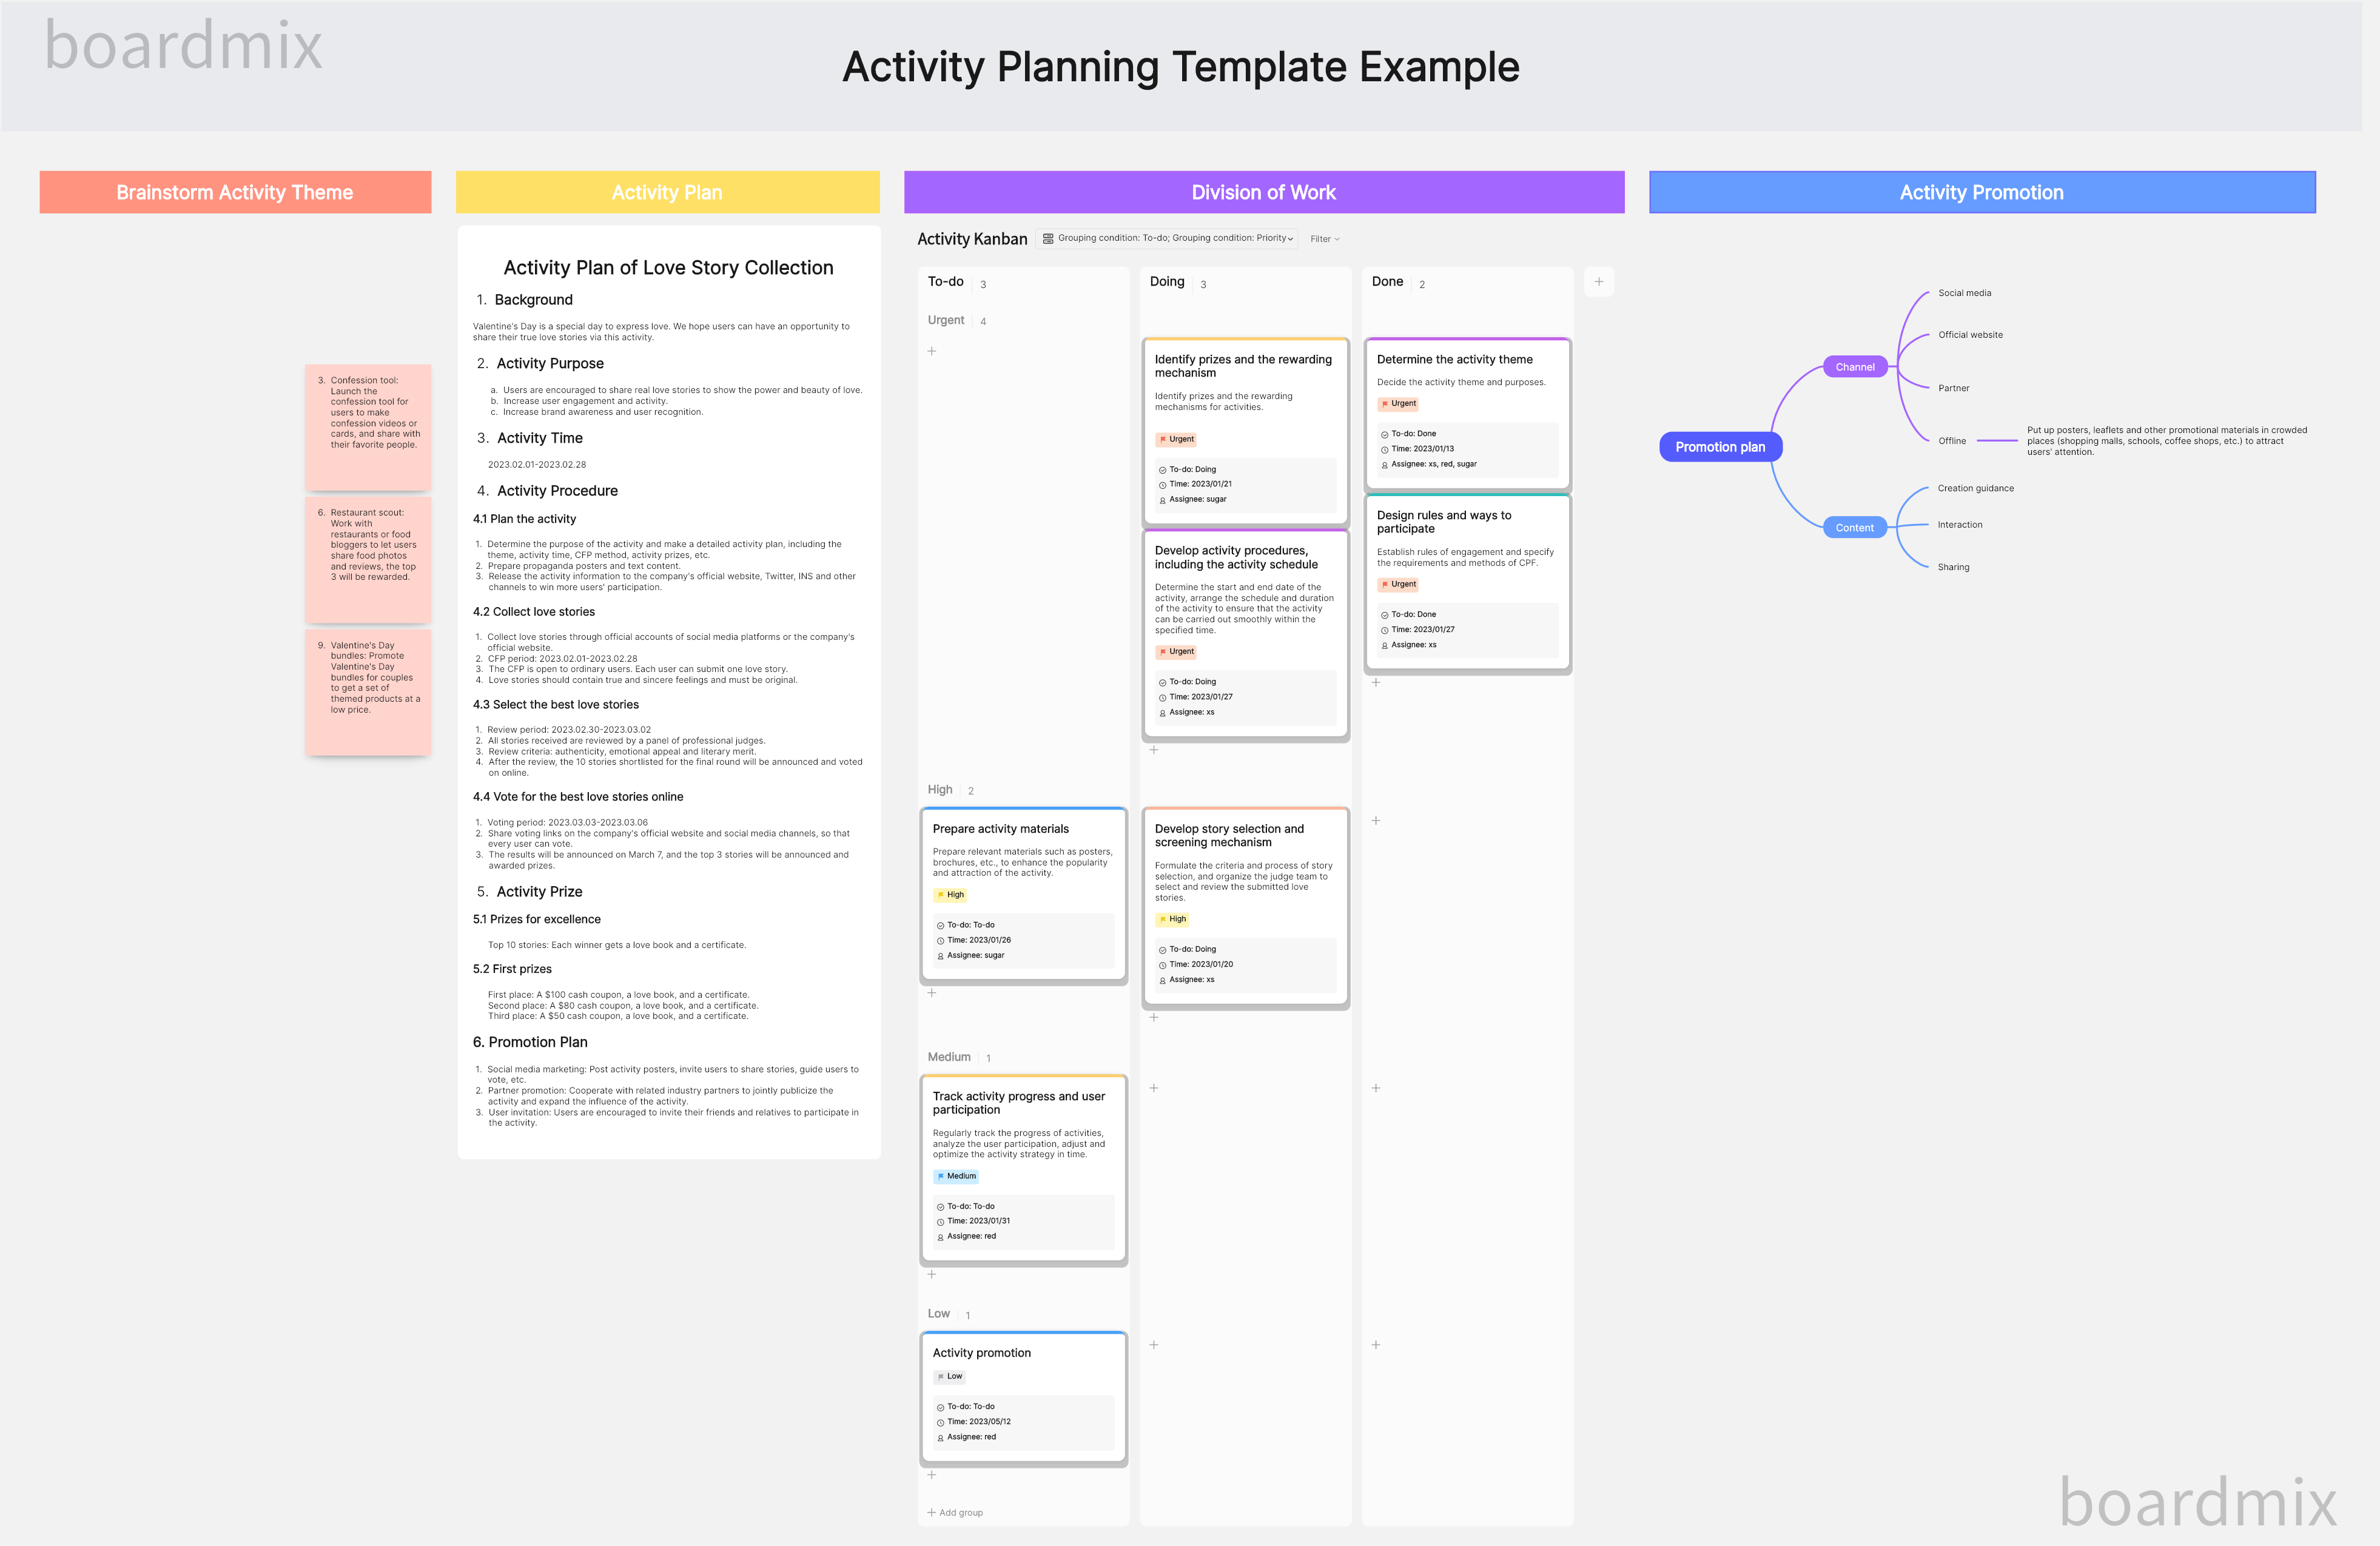 activity-planning-template-example-boardmix